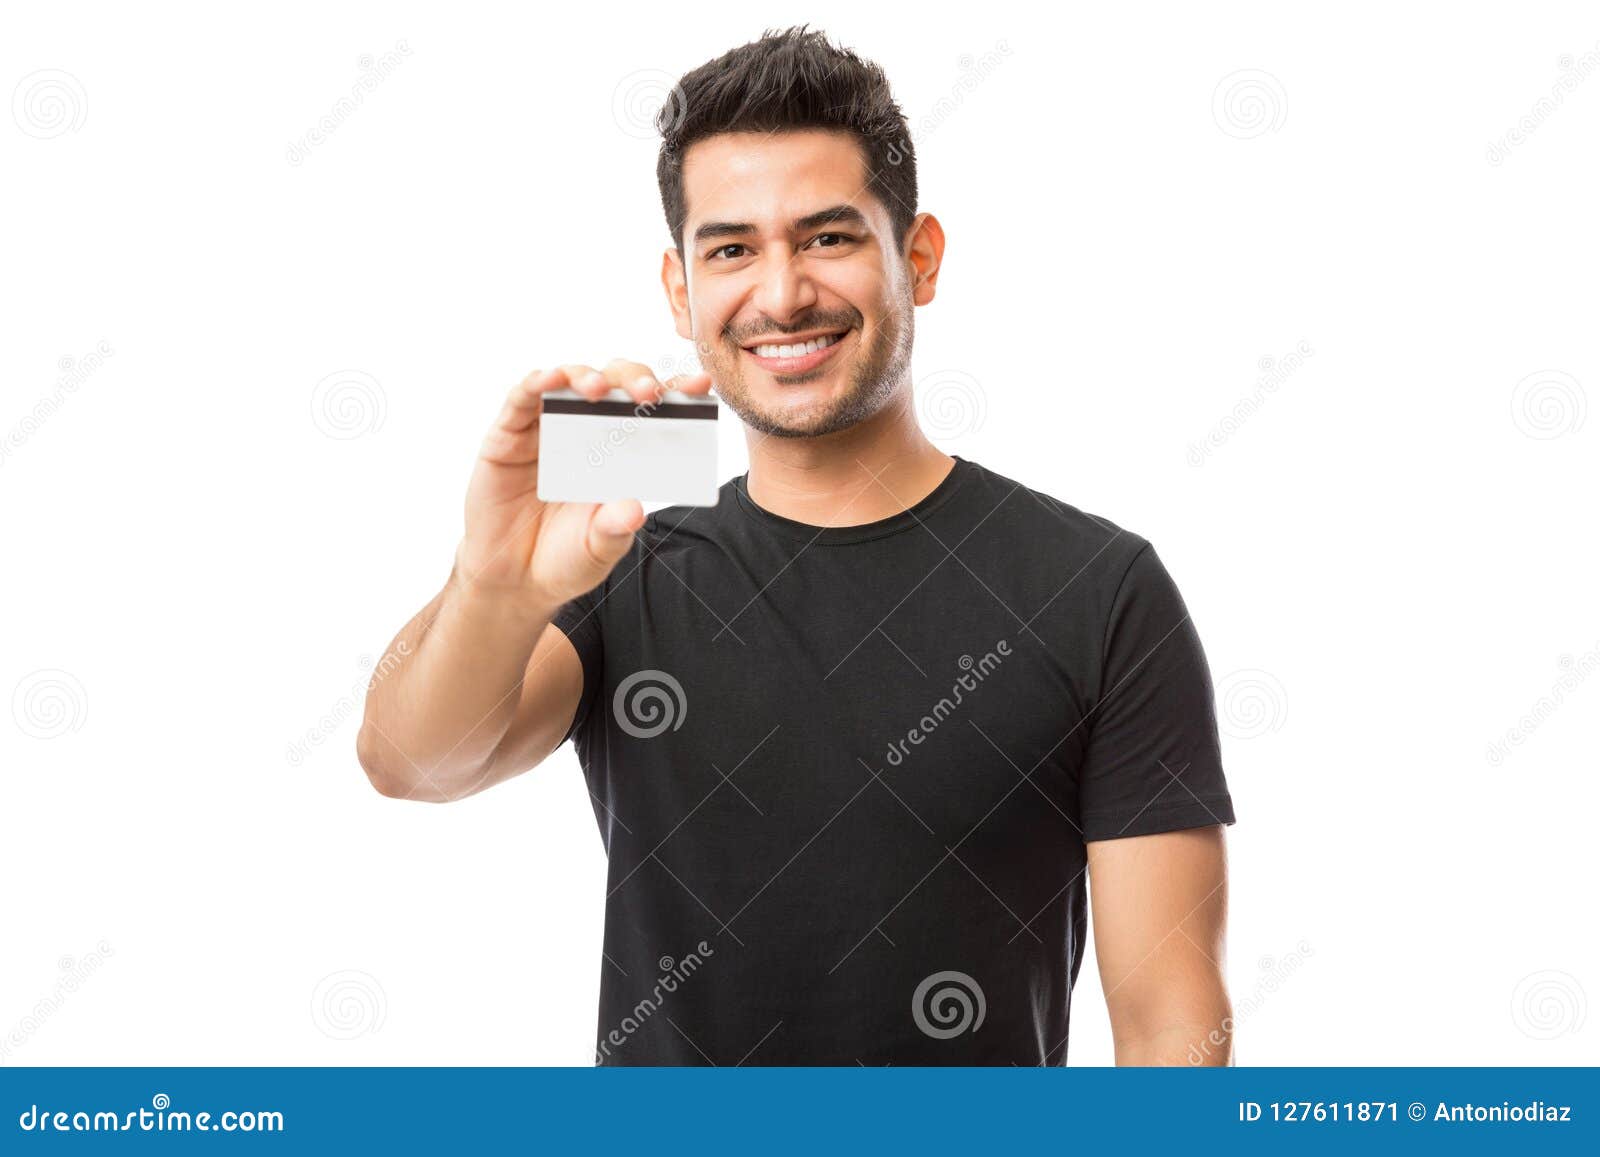 Attractive Guy Promoting Credit Card Stock Image - Image of leisure ...